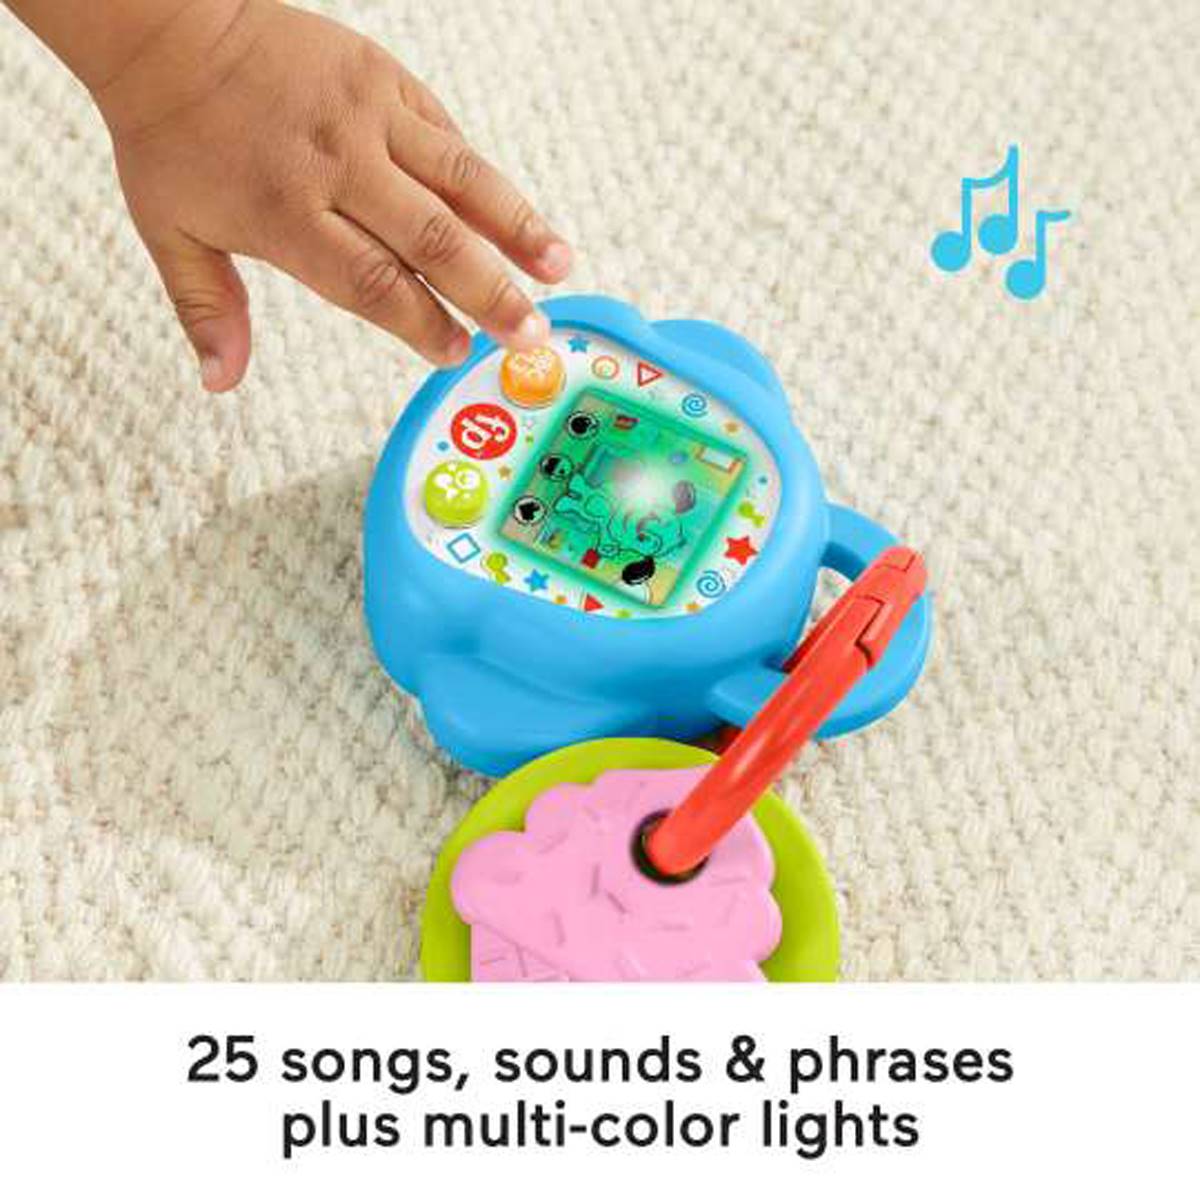 Fisher-Price(R) Laugh & Learn(tm) DigiPet